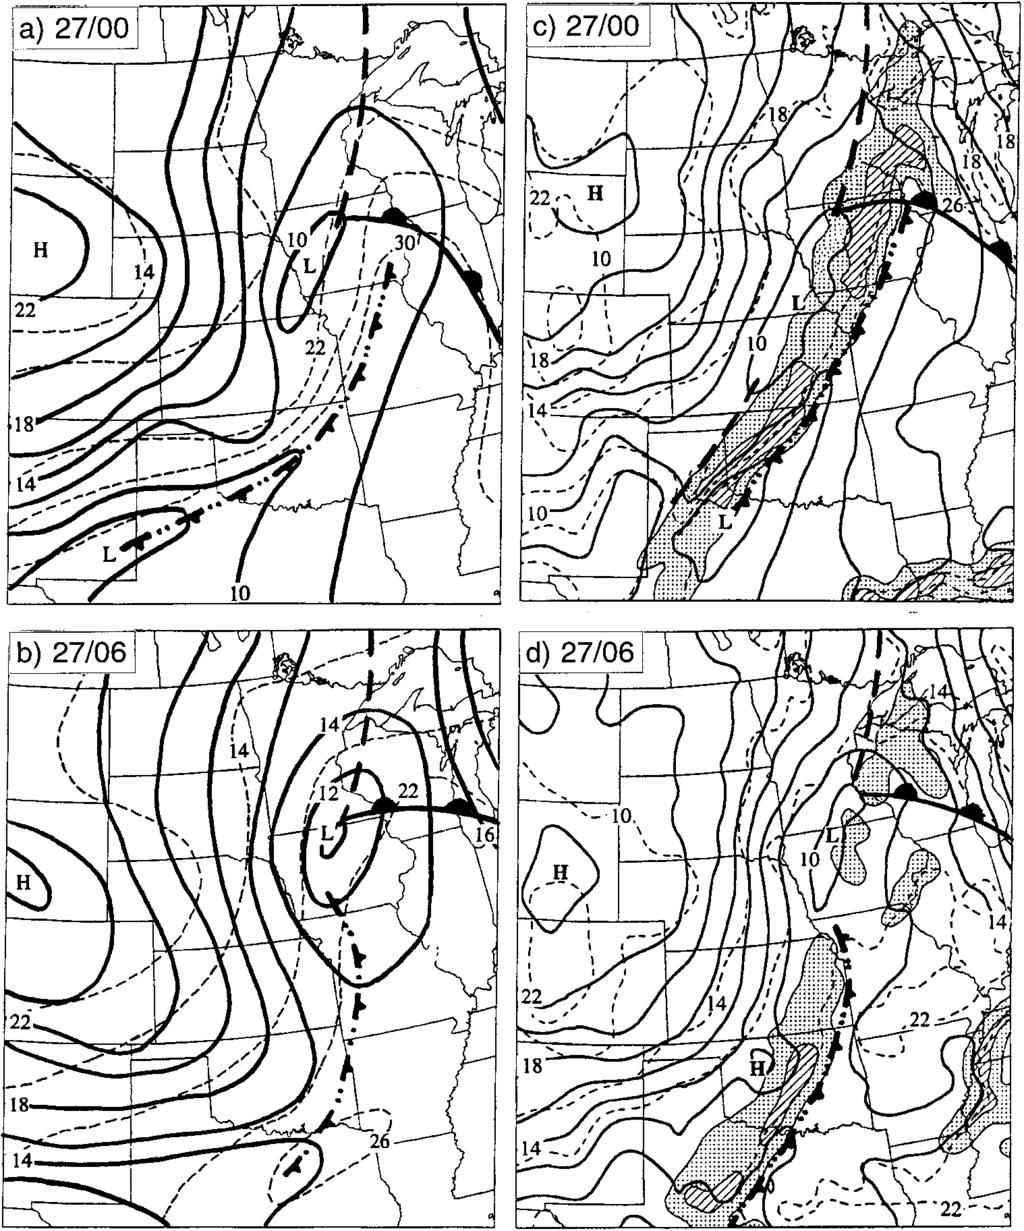 2550 MONTHLY WEATHER REVIEW VOLUME 125 FIG. 6. Left panels show sea level pressure (solid, every 2 hpa) and surface temperature (dashed, every 4 C) at (a) 0000 UTC and (b) 0600 UTC 27 June 1985.